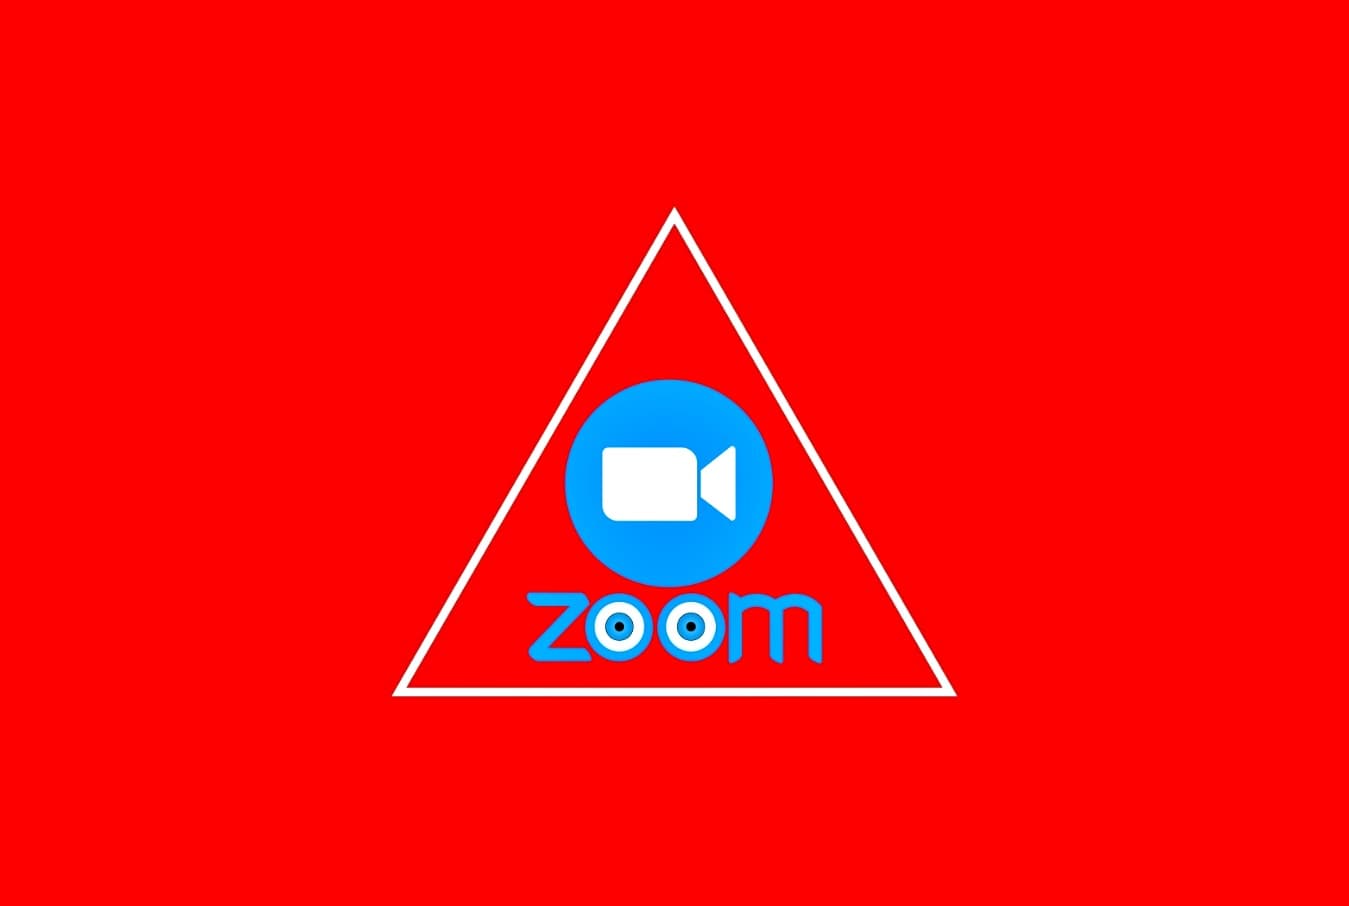 New Zoom vulnerability lets hackers record any meeting anonymously